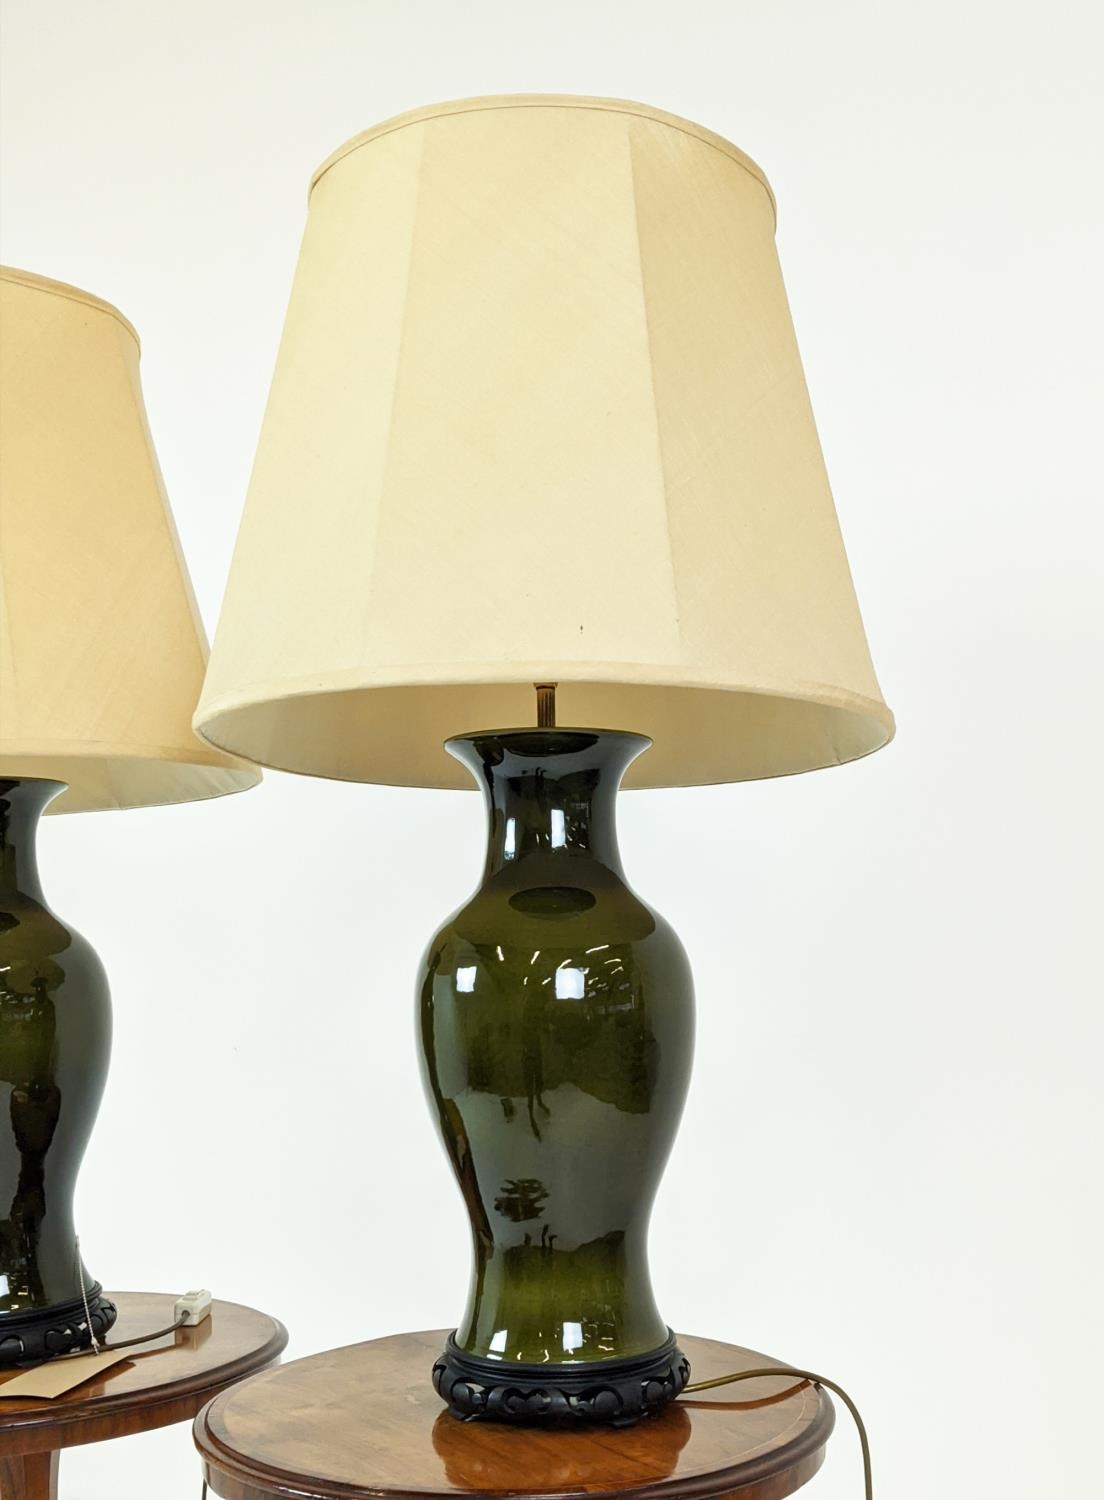 TABLE LAMPS, a pair, 84cm H, glazed ceramic, with shades. (2) - Image 3 of 10